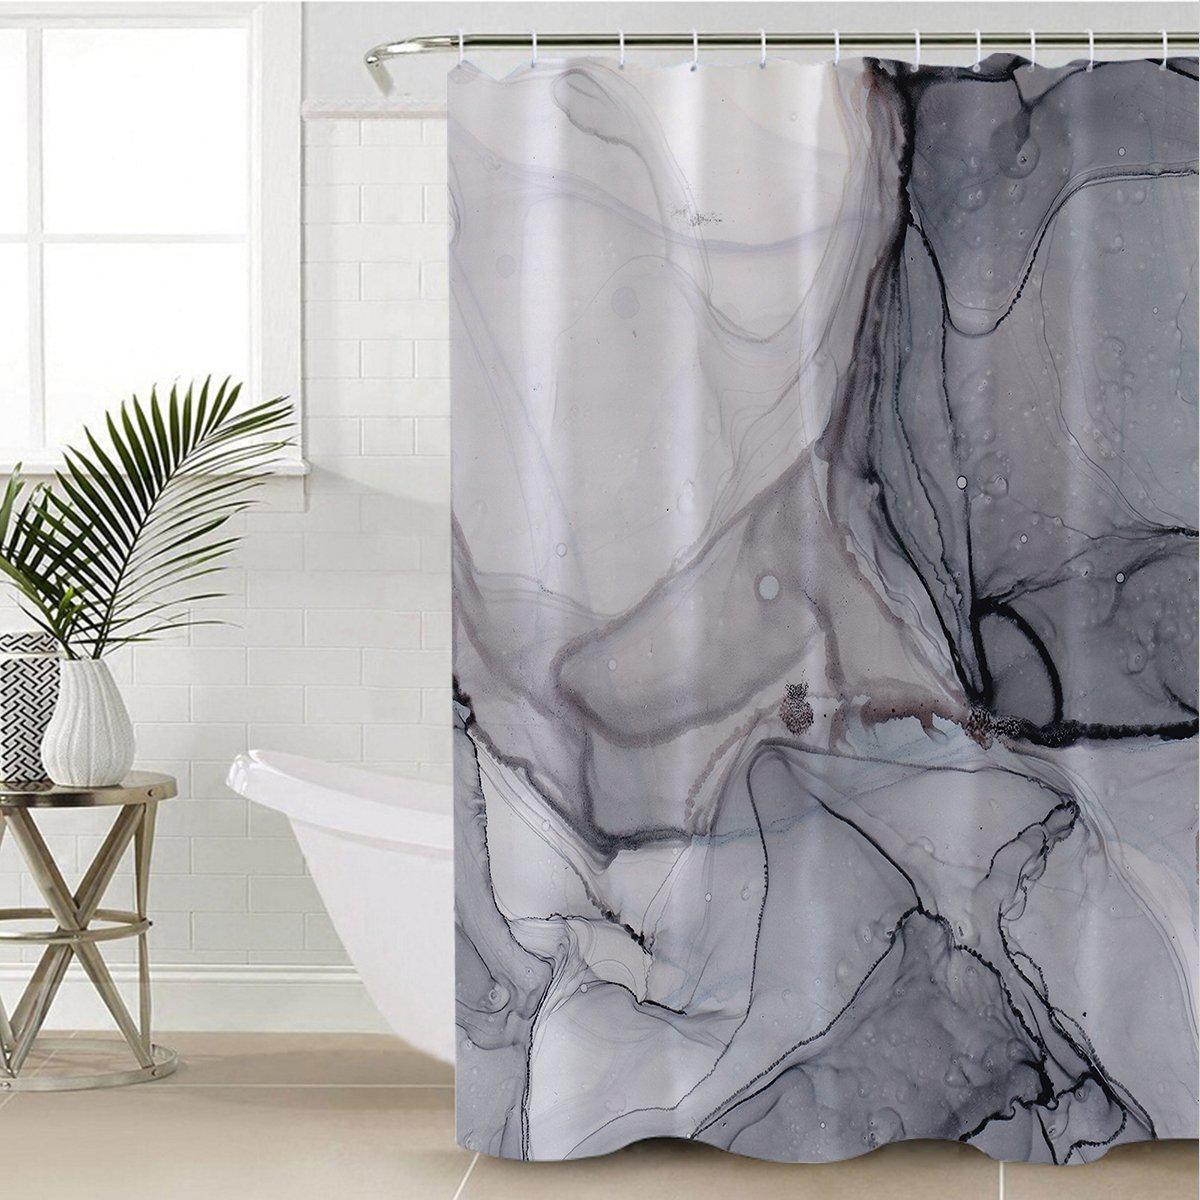 Shower Curtain - Tropical Palm Leaves by Coastal Passion